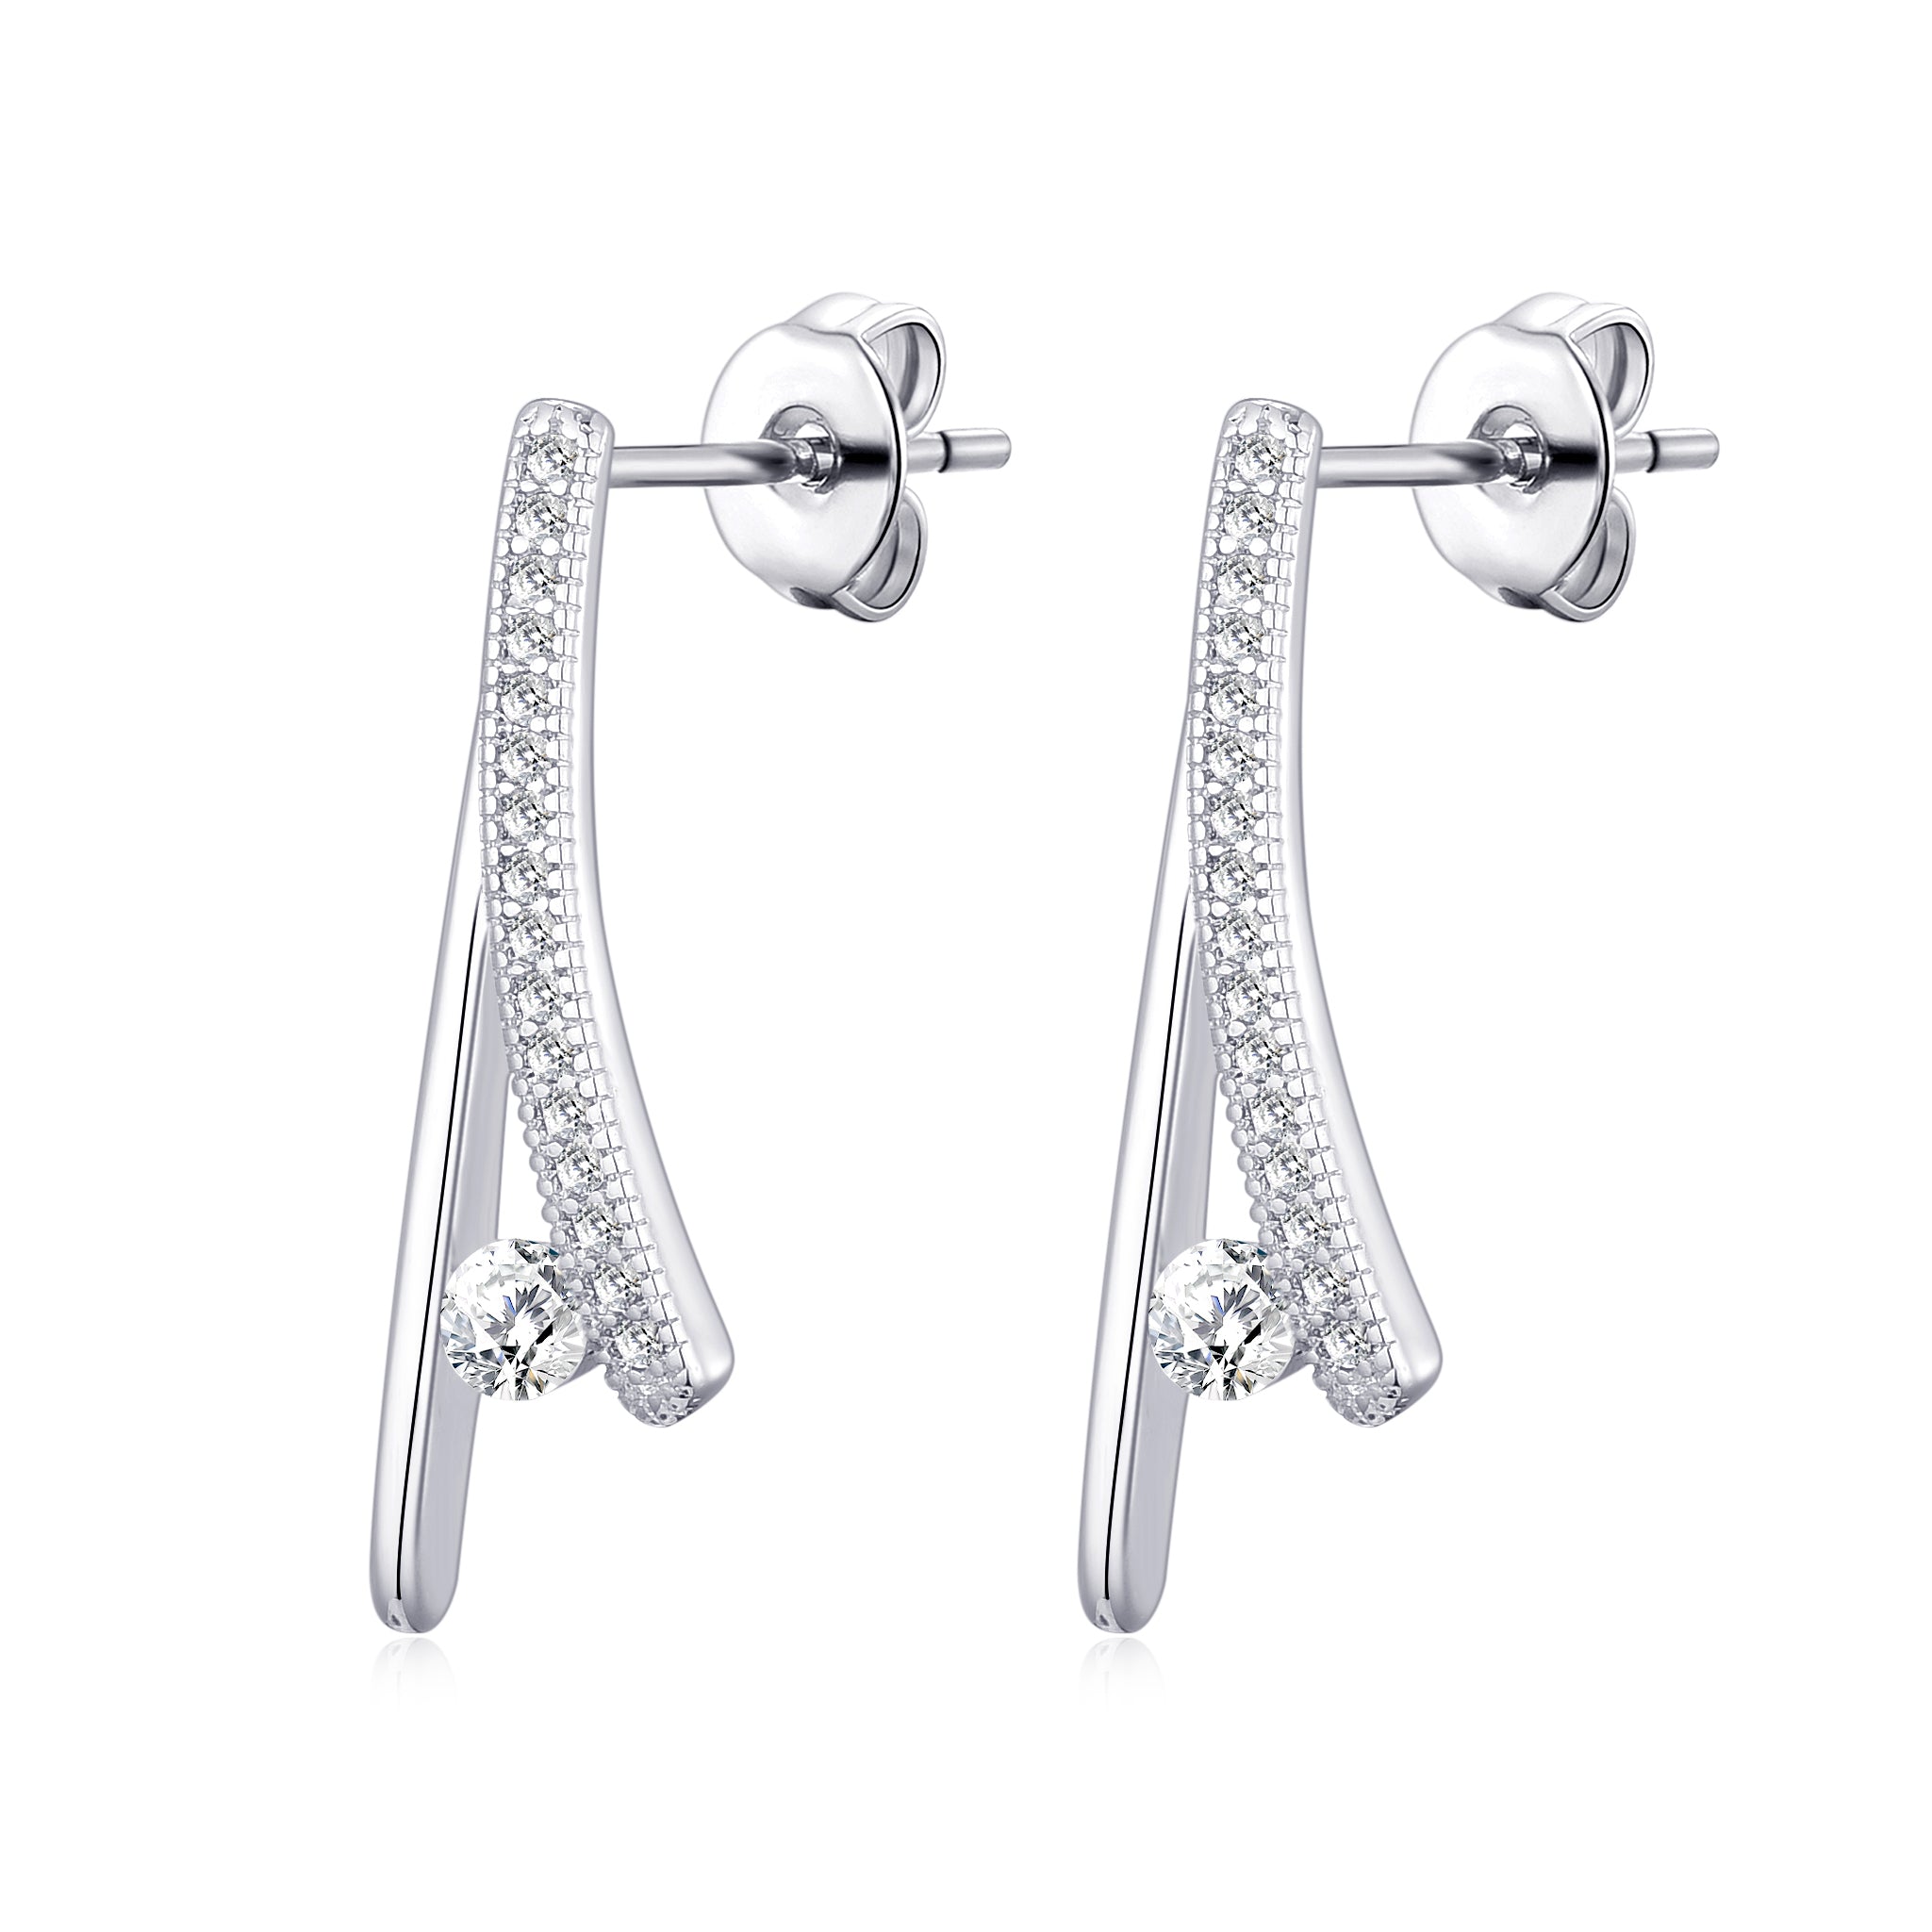 Silver Plated Curved Bar Earrings Created with Zircondia® Crystals by Philip Jones Jewellery